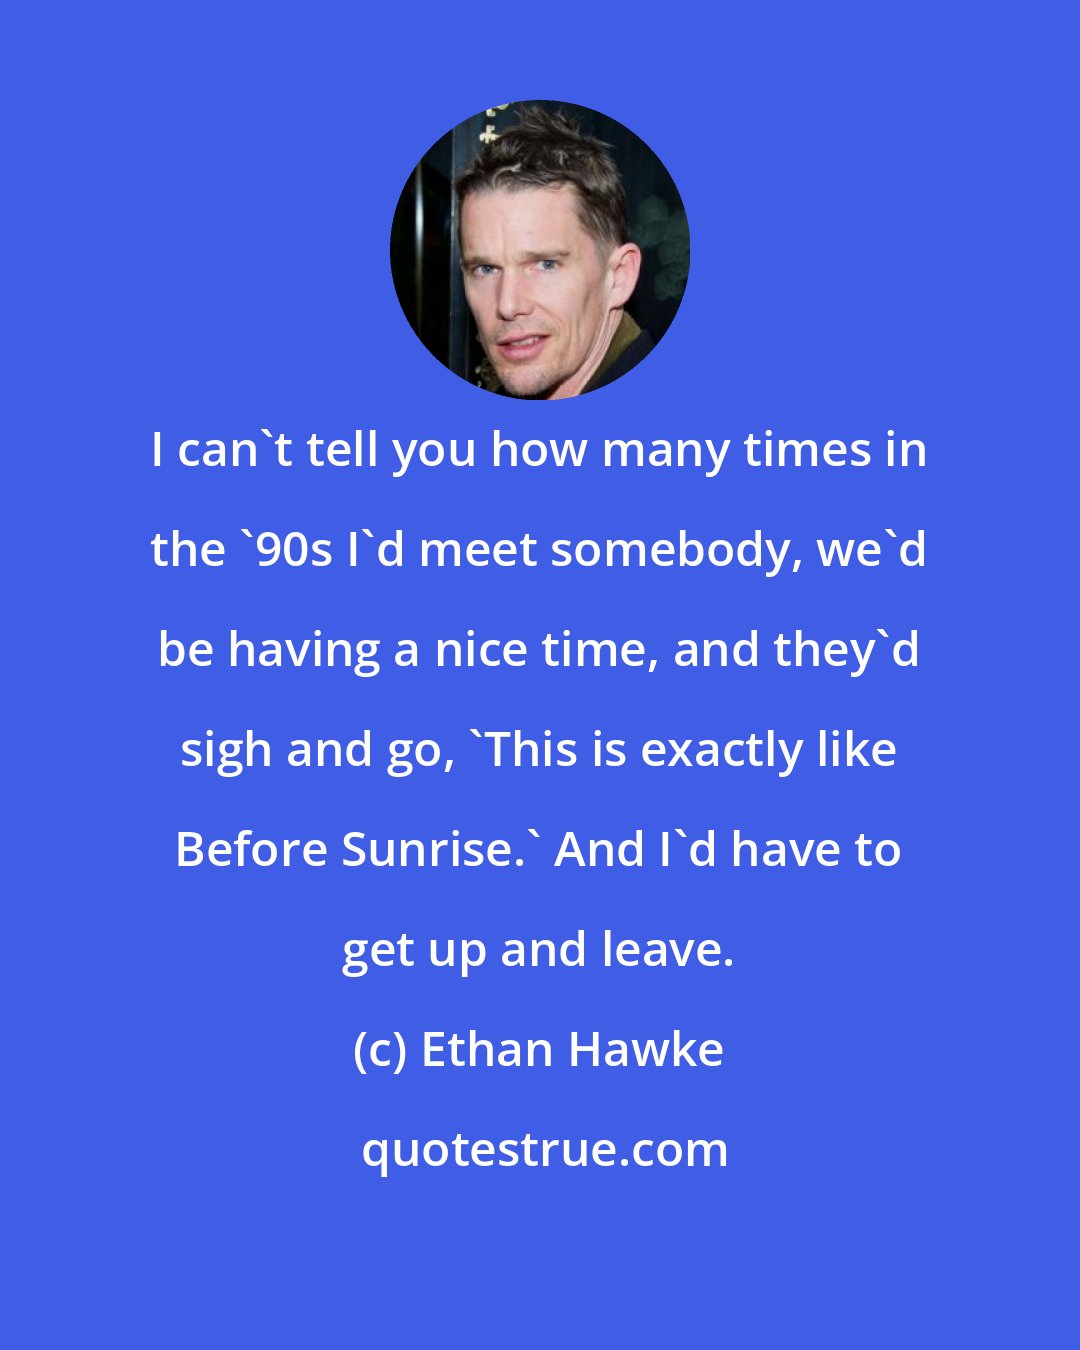 Ethan Hawke: I can't tell you how many times in the '90s I'd meet somebody, we'd be having a nice time, and they'd sigh and go, 'This is exactly like Before Sunrise.' And I'd have to get up and leave.